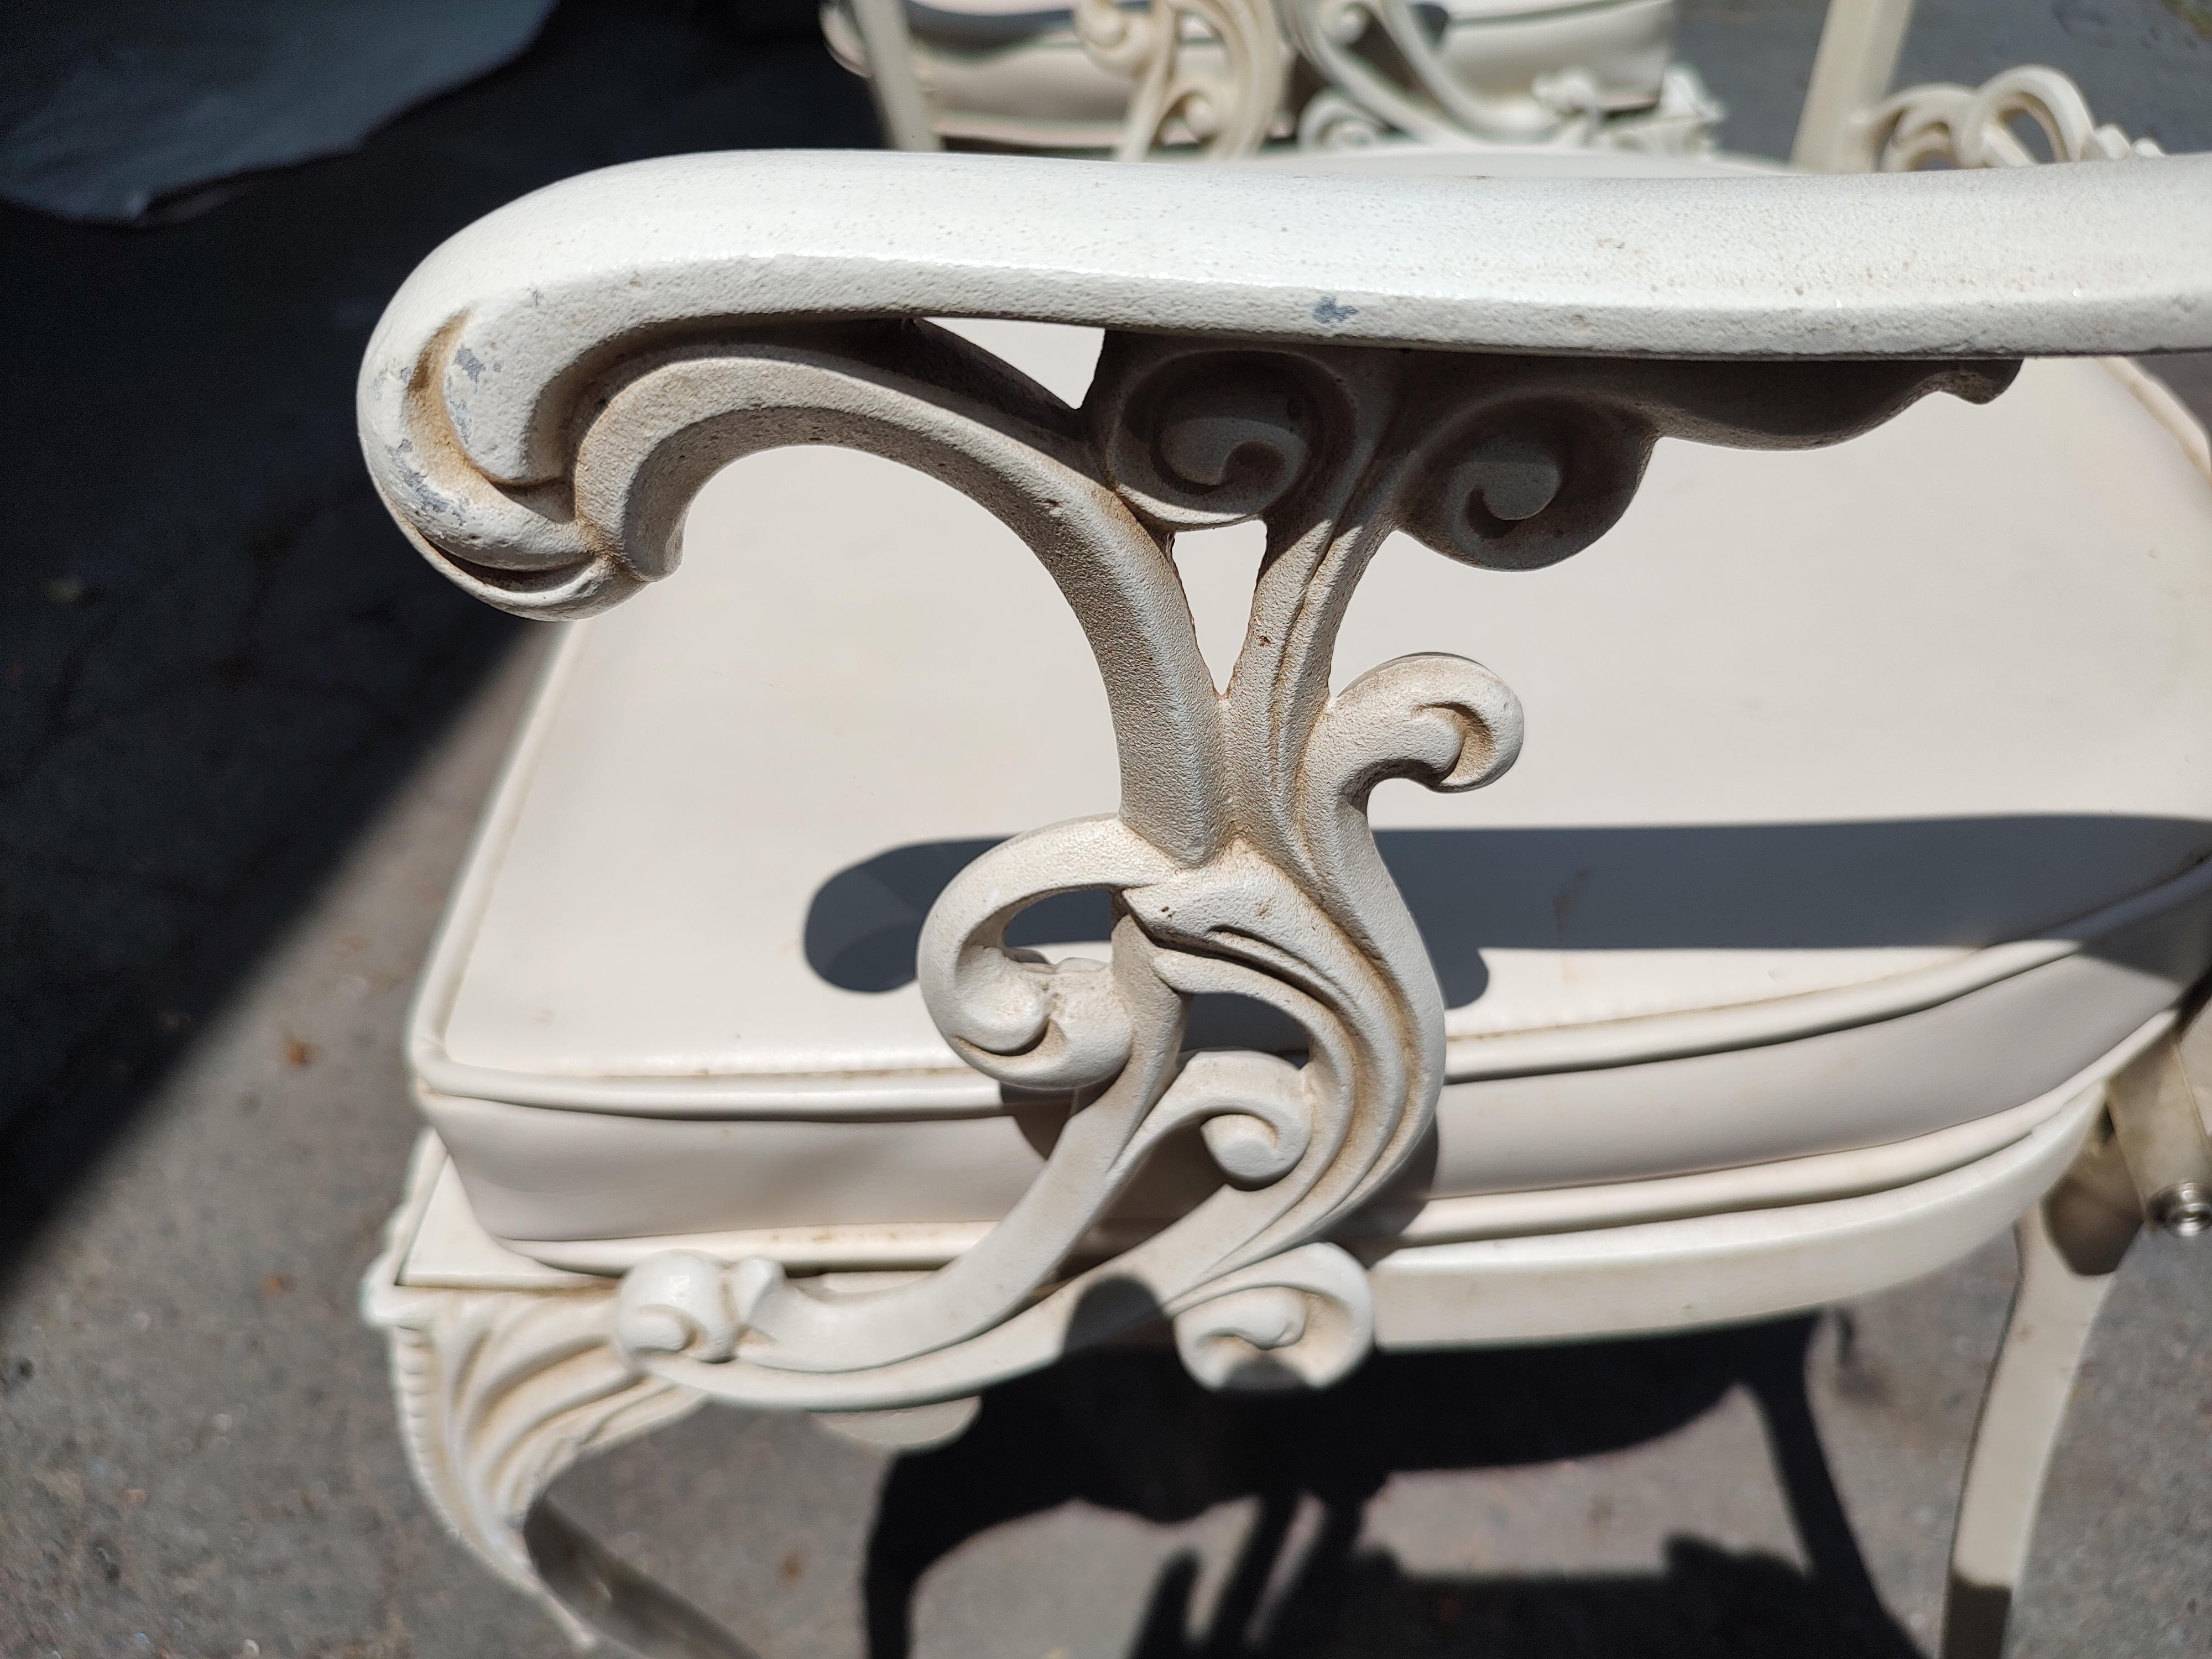 Classic fabulous indoor outdoor patio set in cast aluminum by Molla of Italy. Impeccable castings in aluminum and then powder coated. Ball and claw foot on front legs of the chairs where there is a double casting on the seat backs. All are armchairs